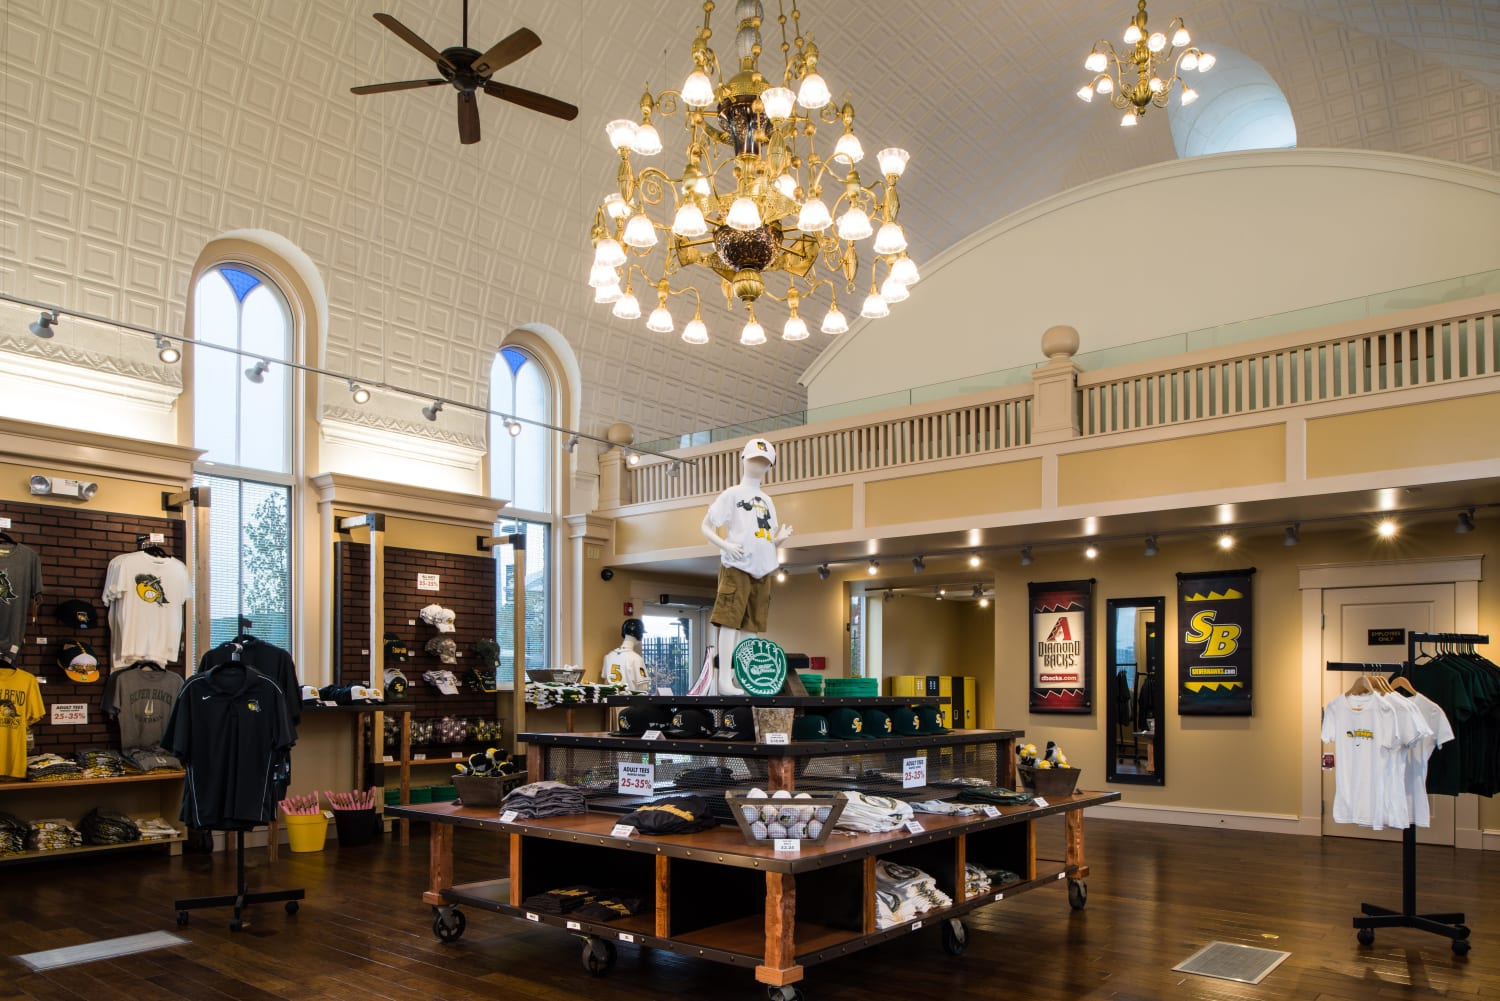 Play Ball! Jewish Synagogue Converted Into Team Store